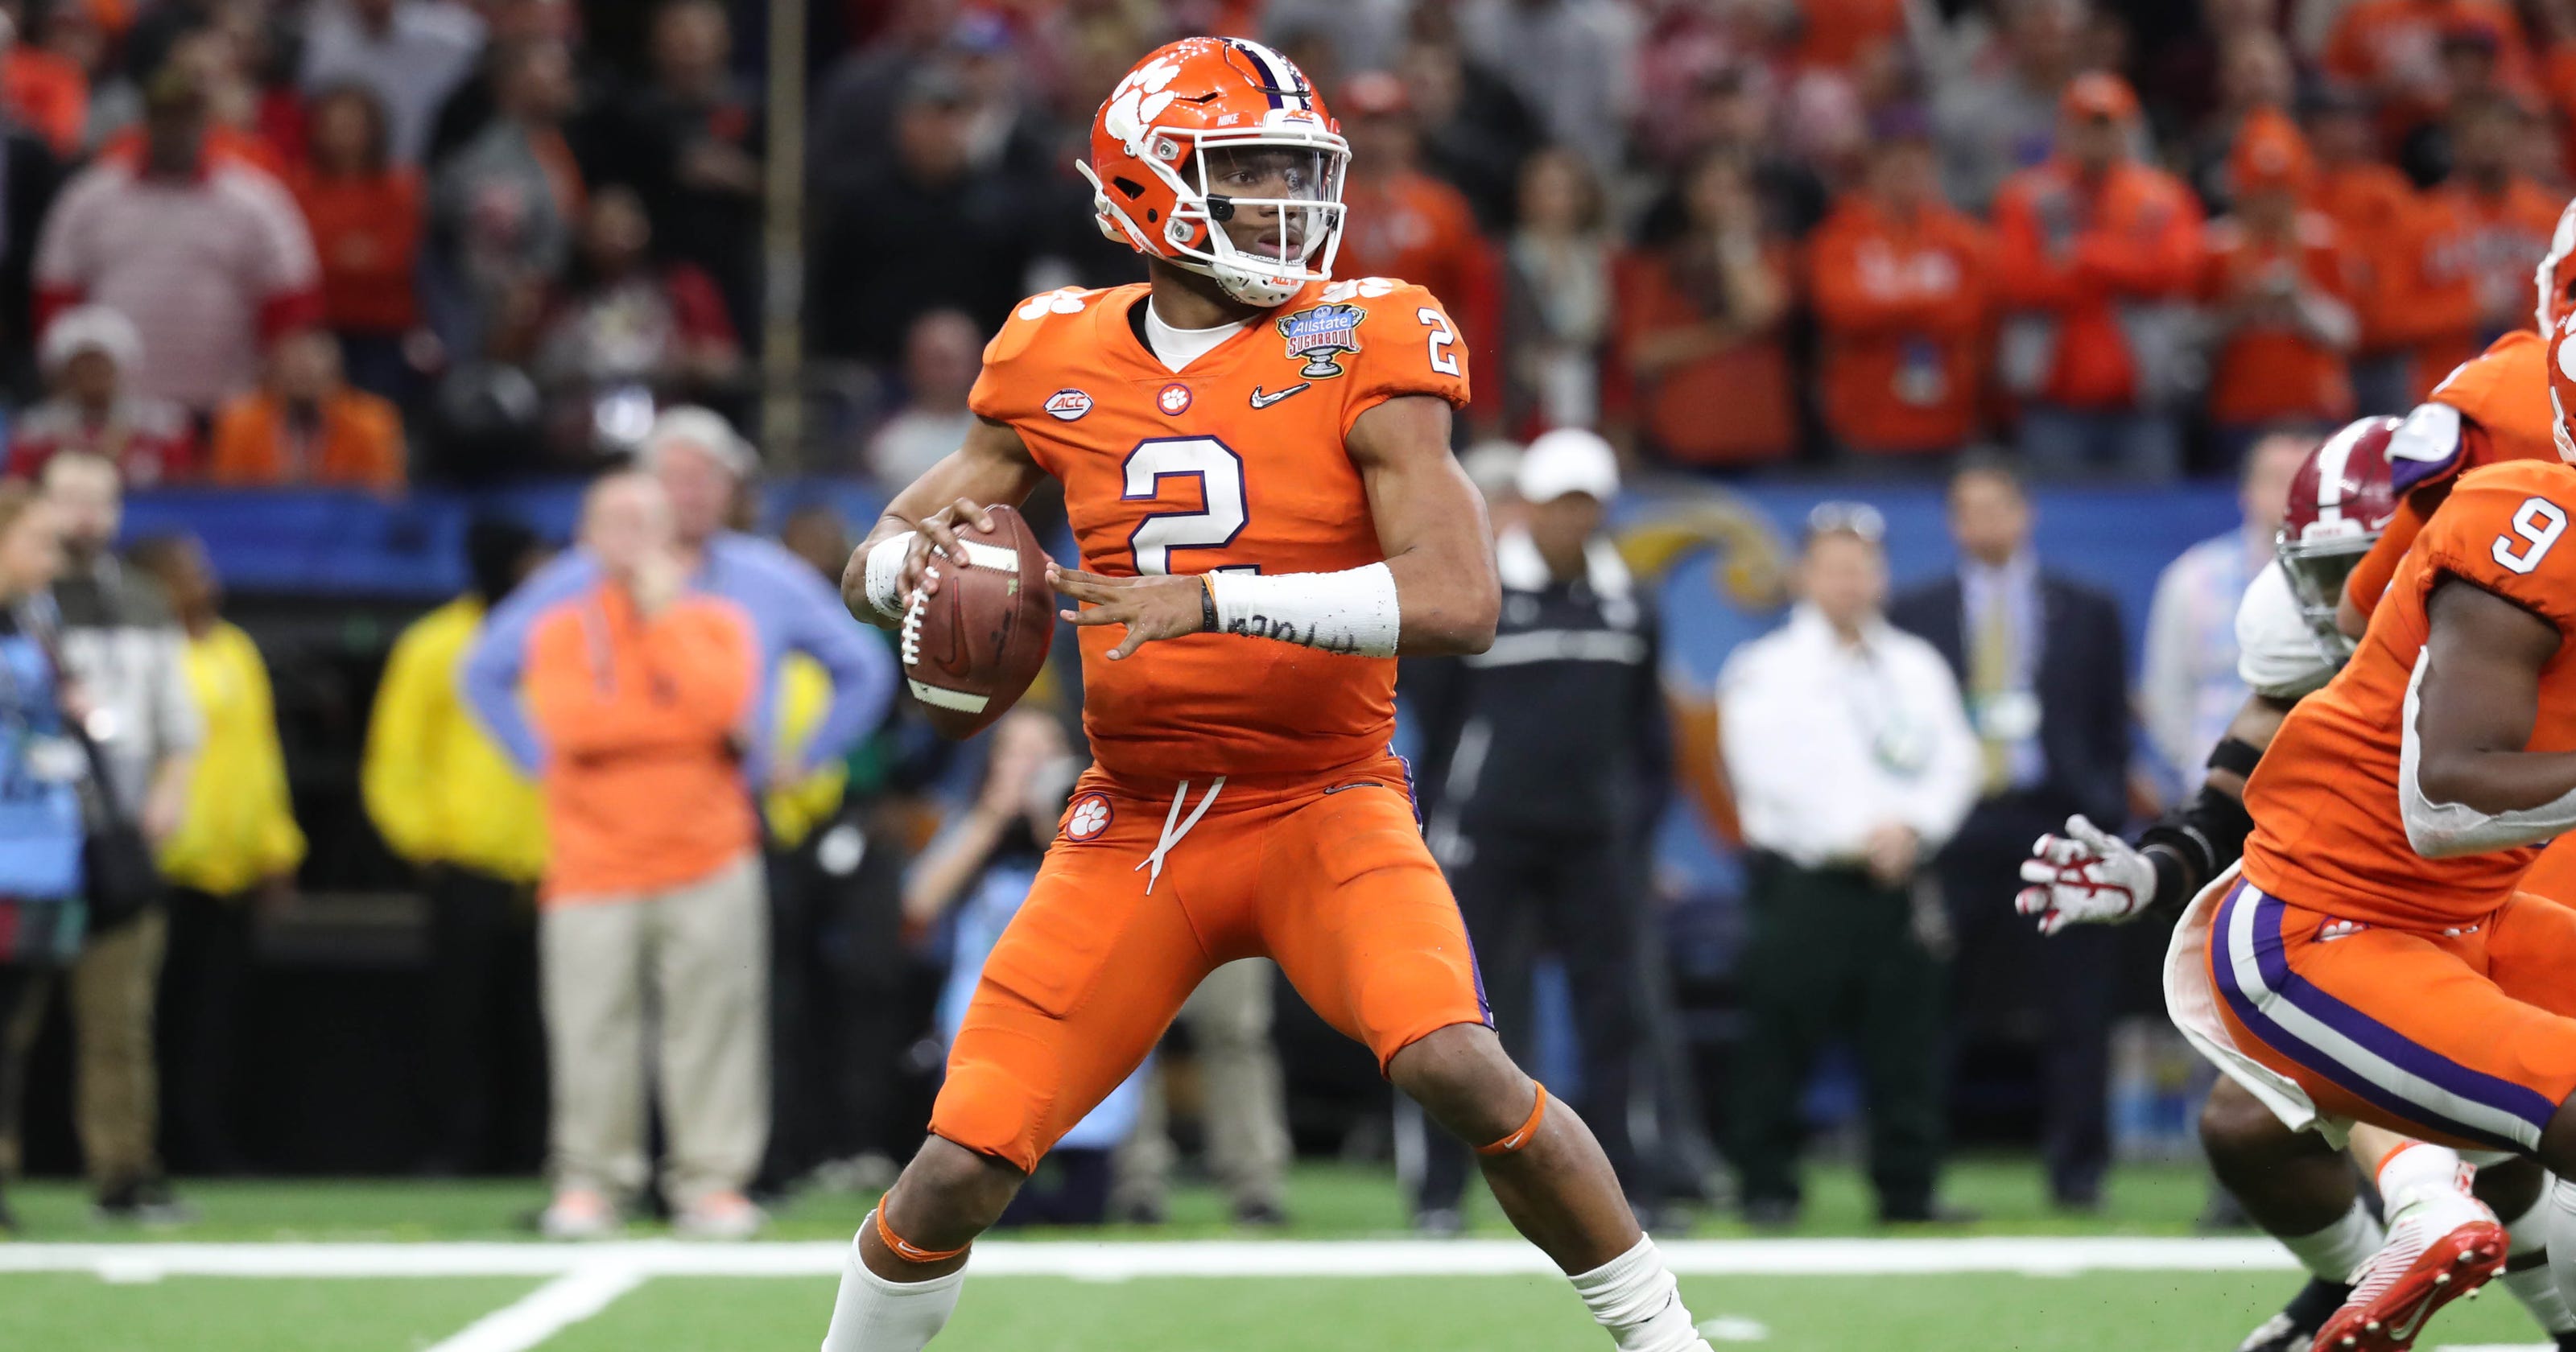 27 HQ Pictures College Football Stats Today - USA TODAY Sports' college football Freshman All-America team